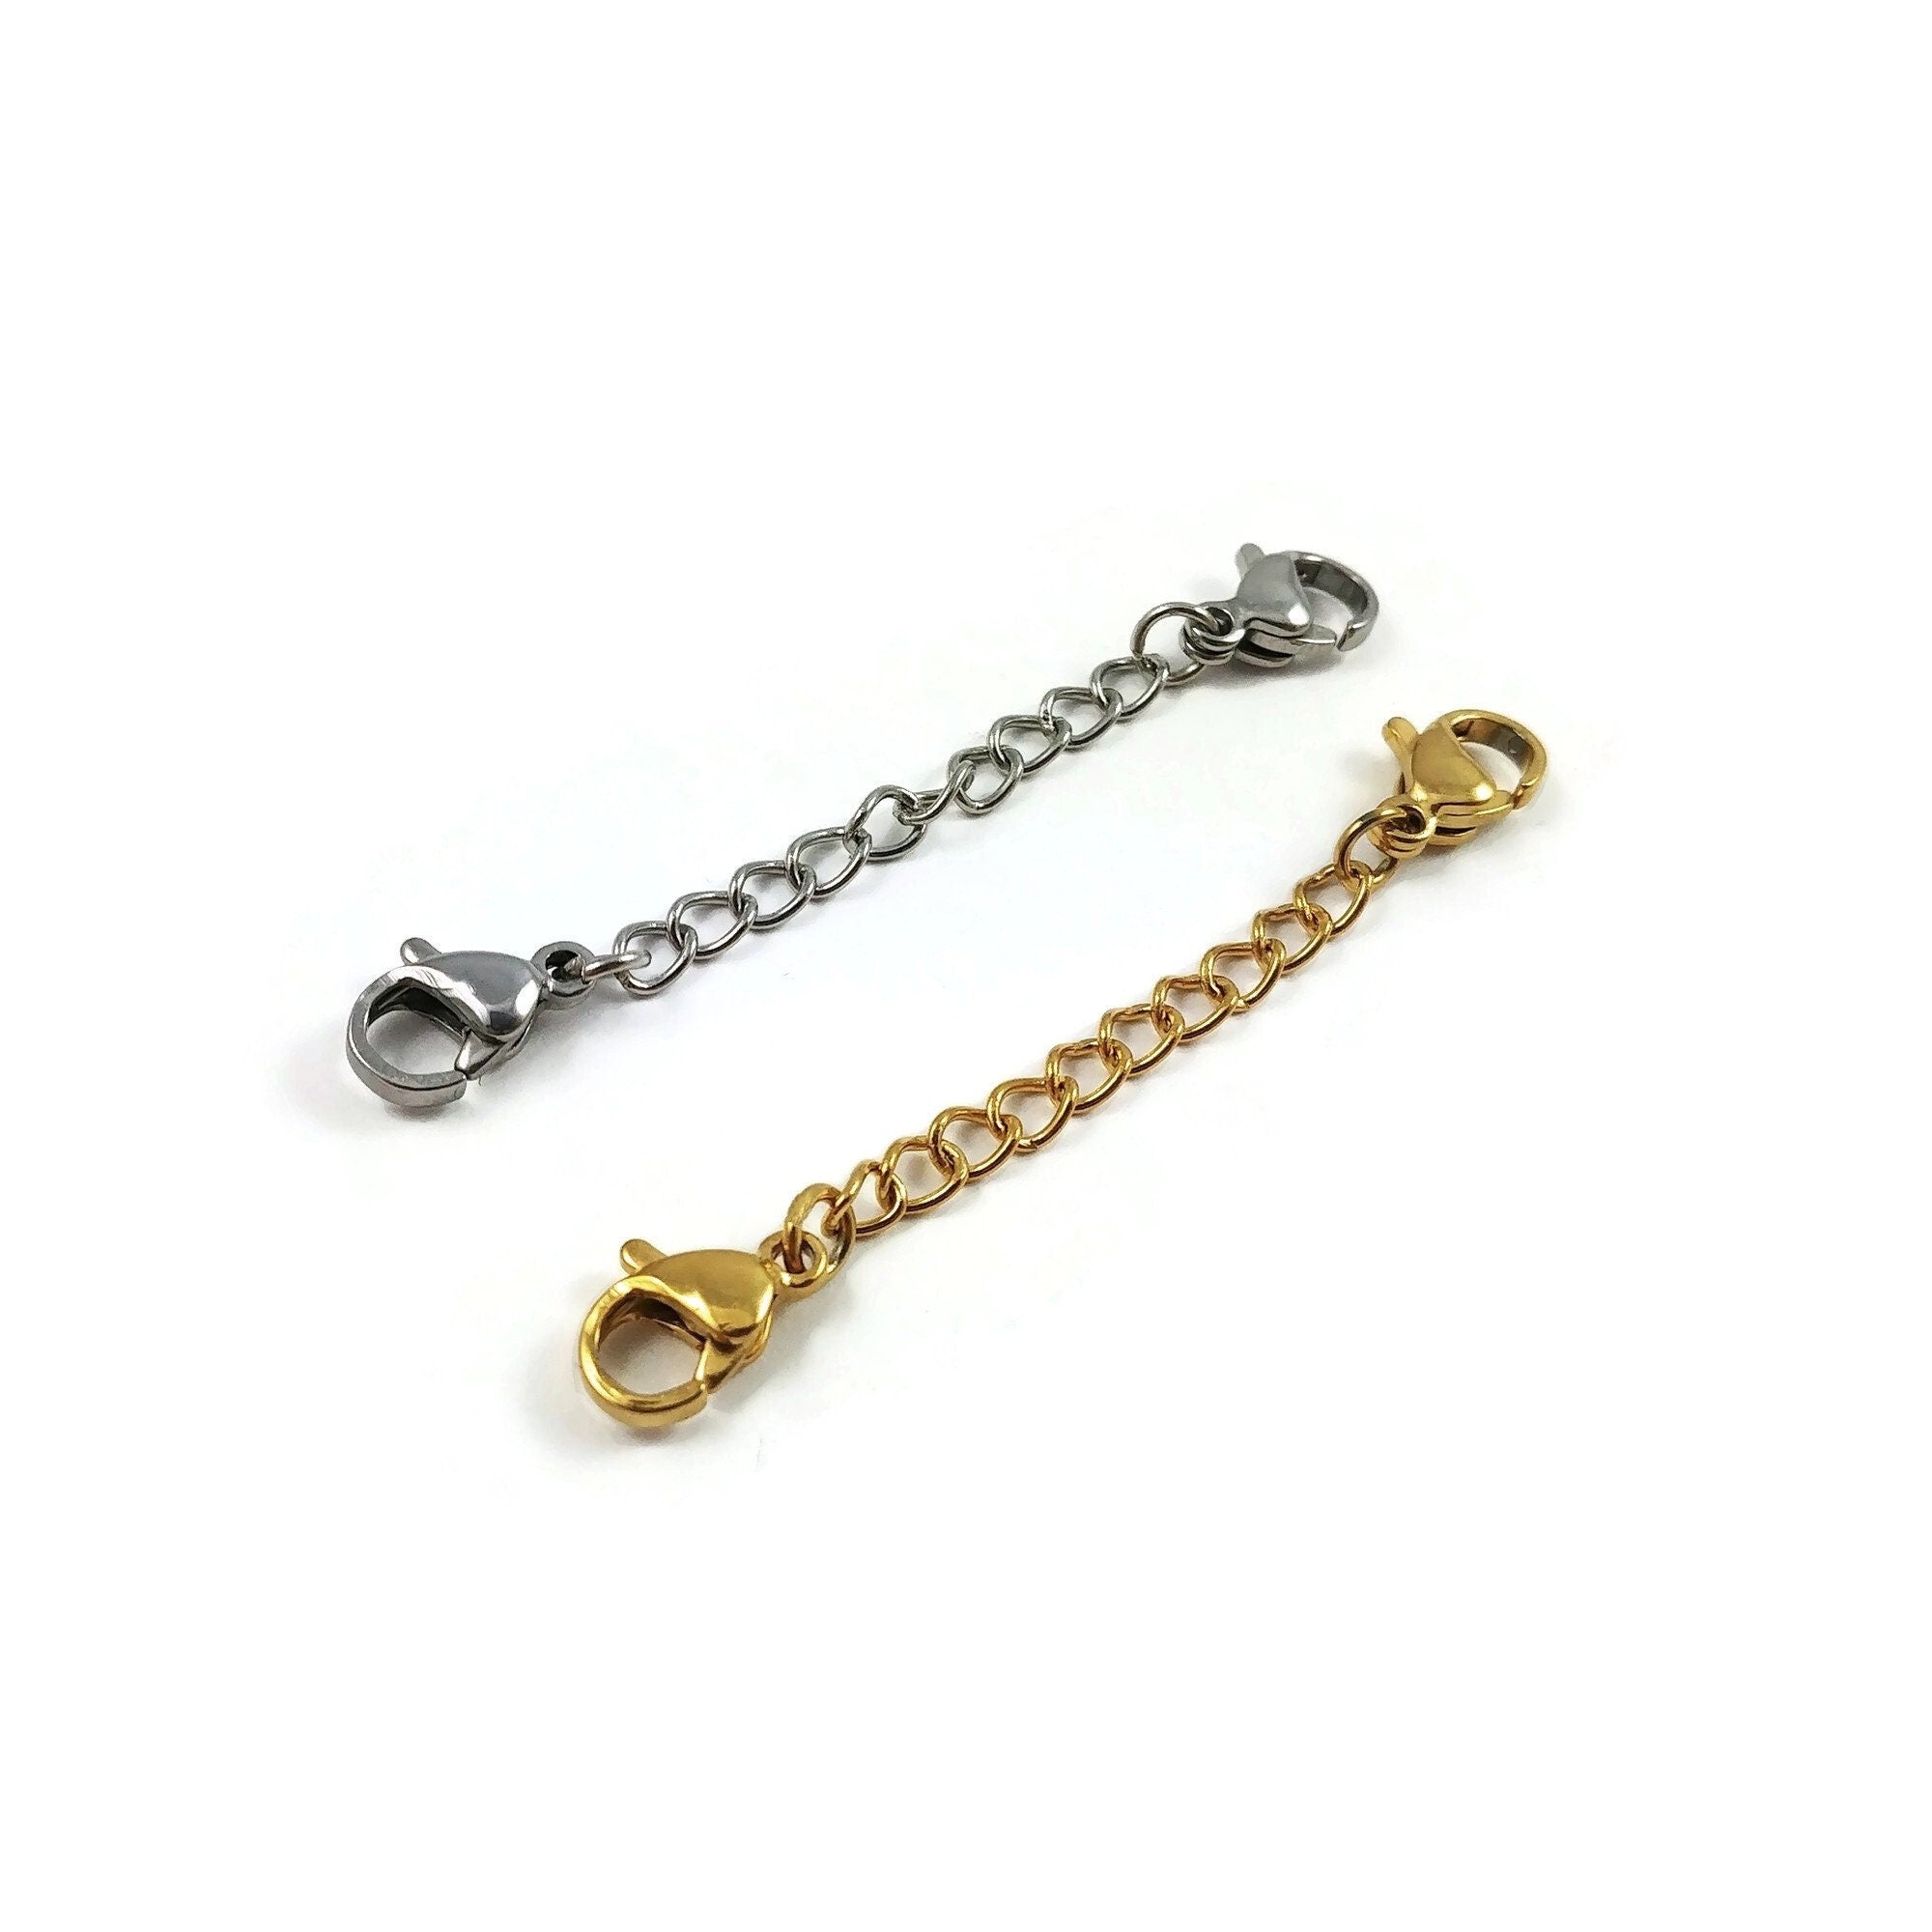 A necklace or a bracelet extender, Removable, Attach your own, Add on,  Adjustable length, 1, 2, 3, 4 inch (CG241N).